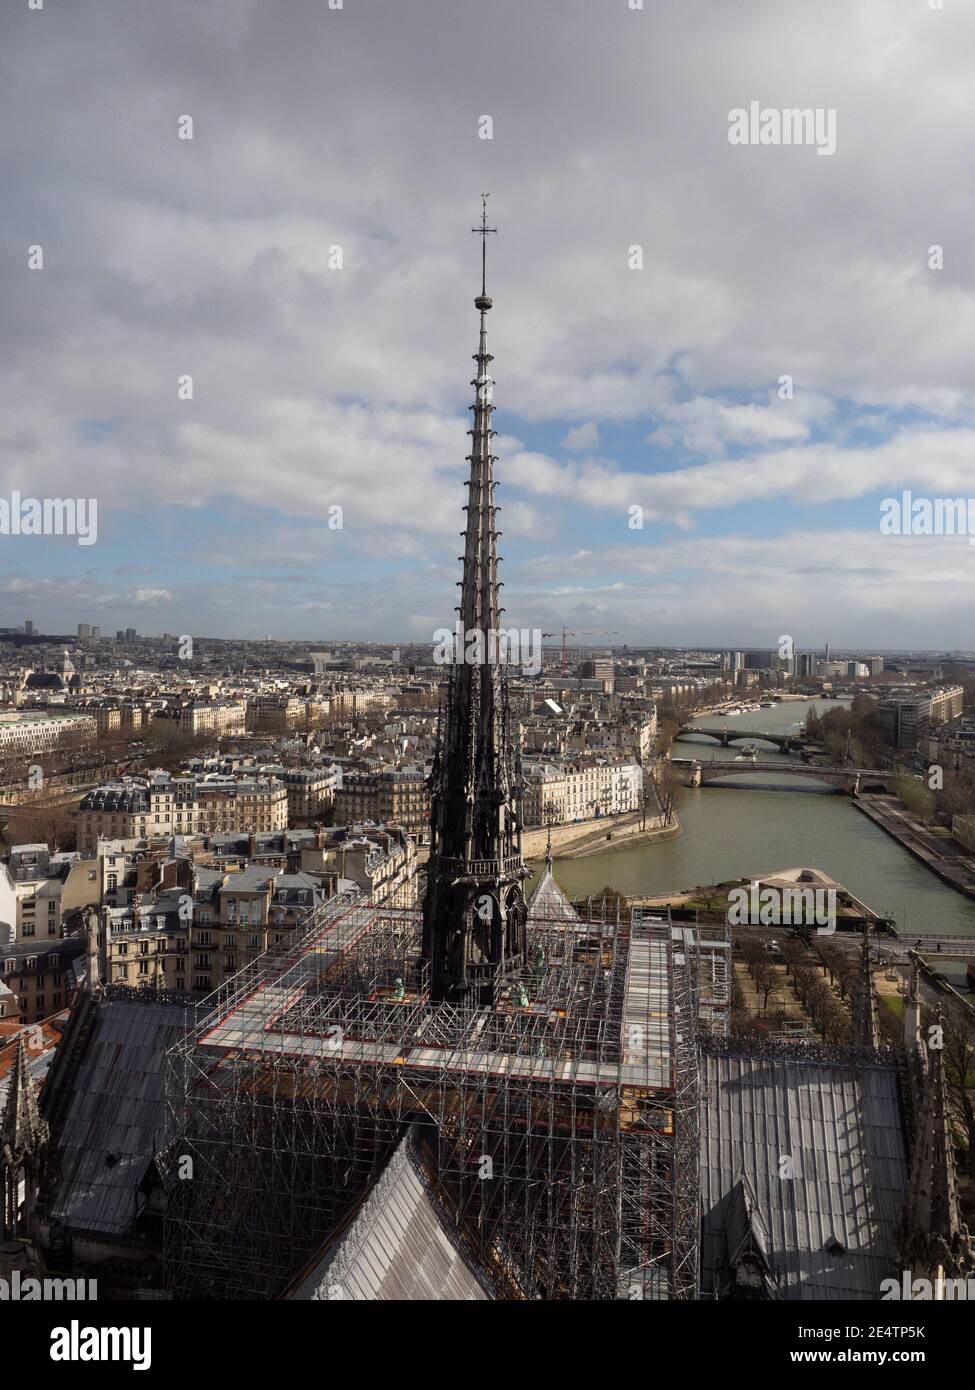 Panorama view of construction site on roof of Notre Dame de Paris France cathedral March 2019 before fire disaster collapsed spire Stock Photo